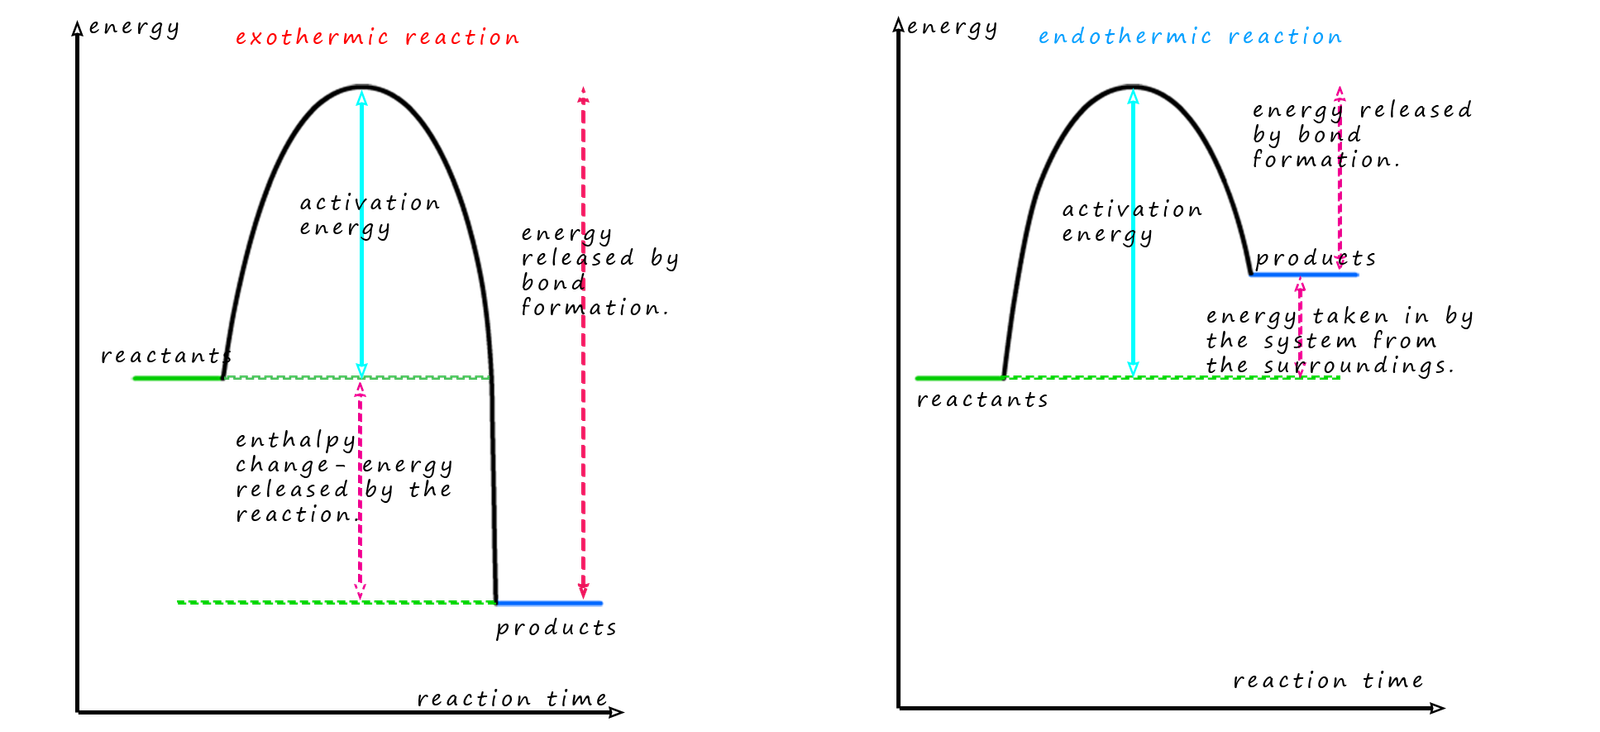 Energy profile diagrams for an exothermic and endothermic reaction.